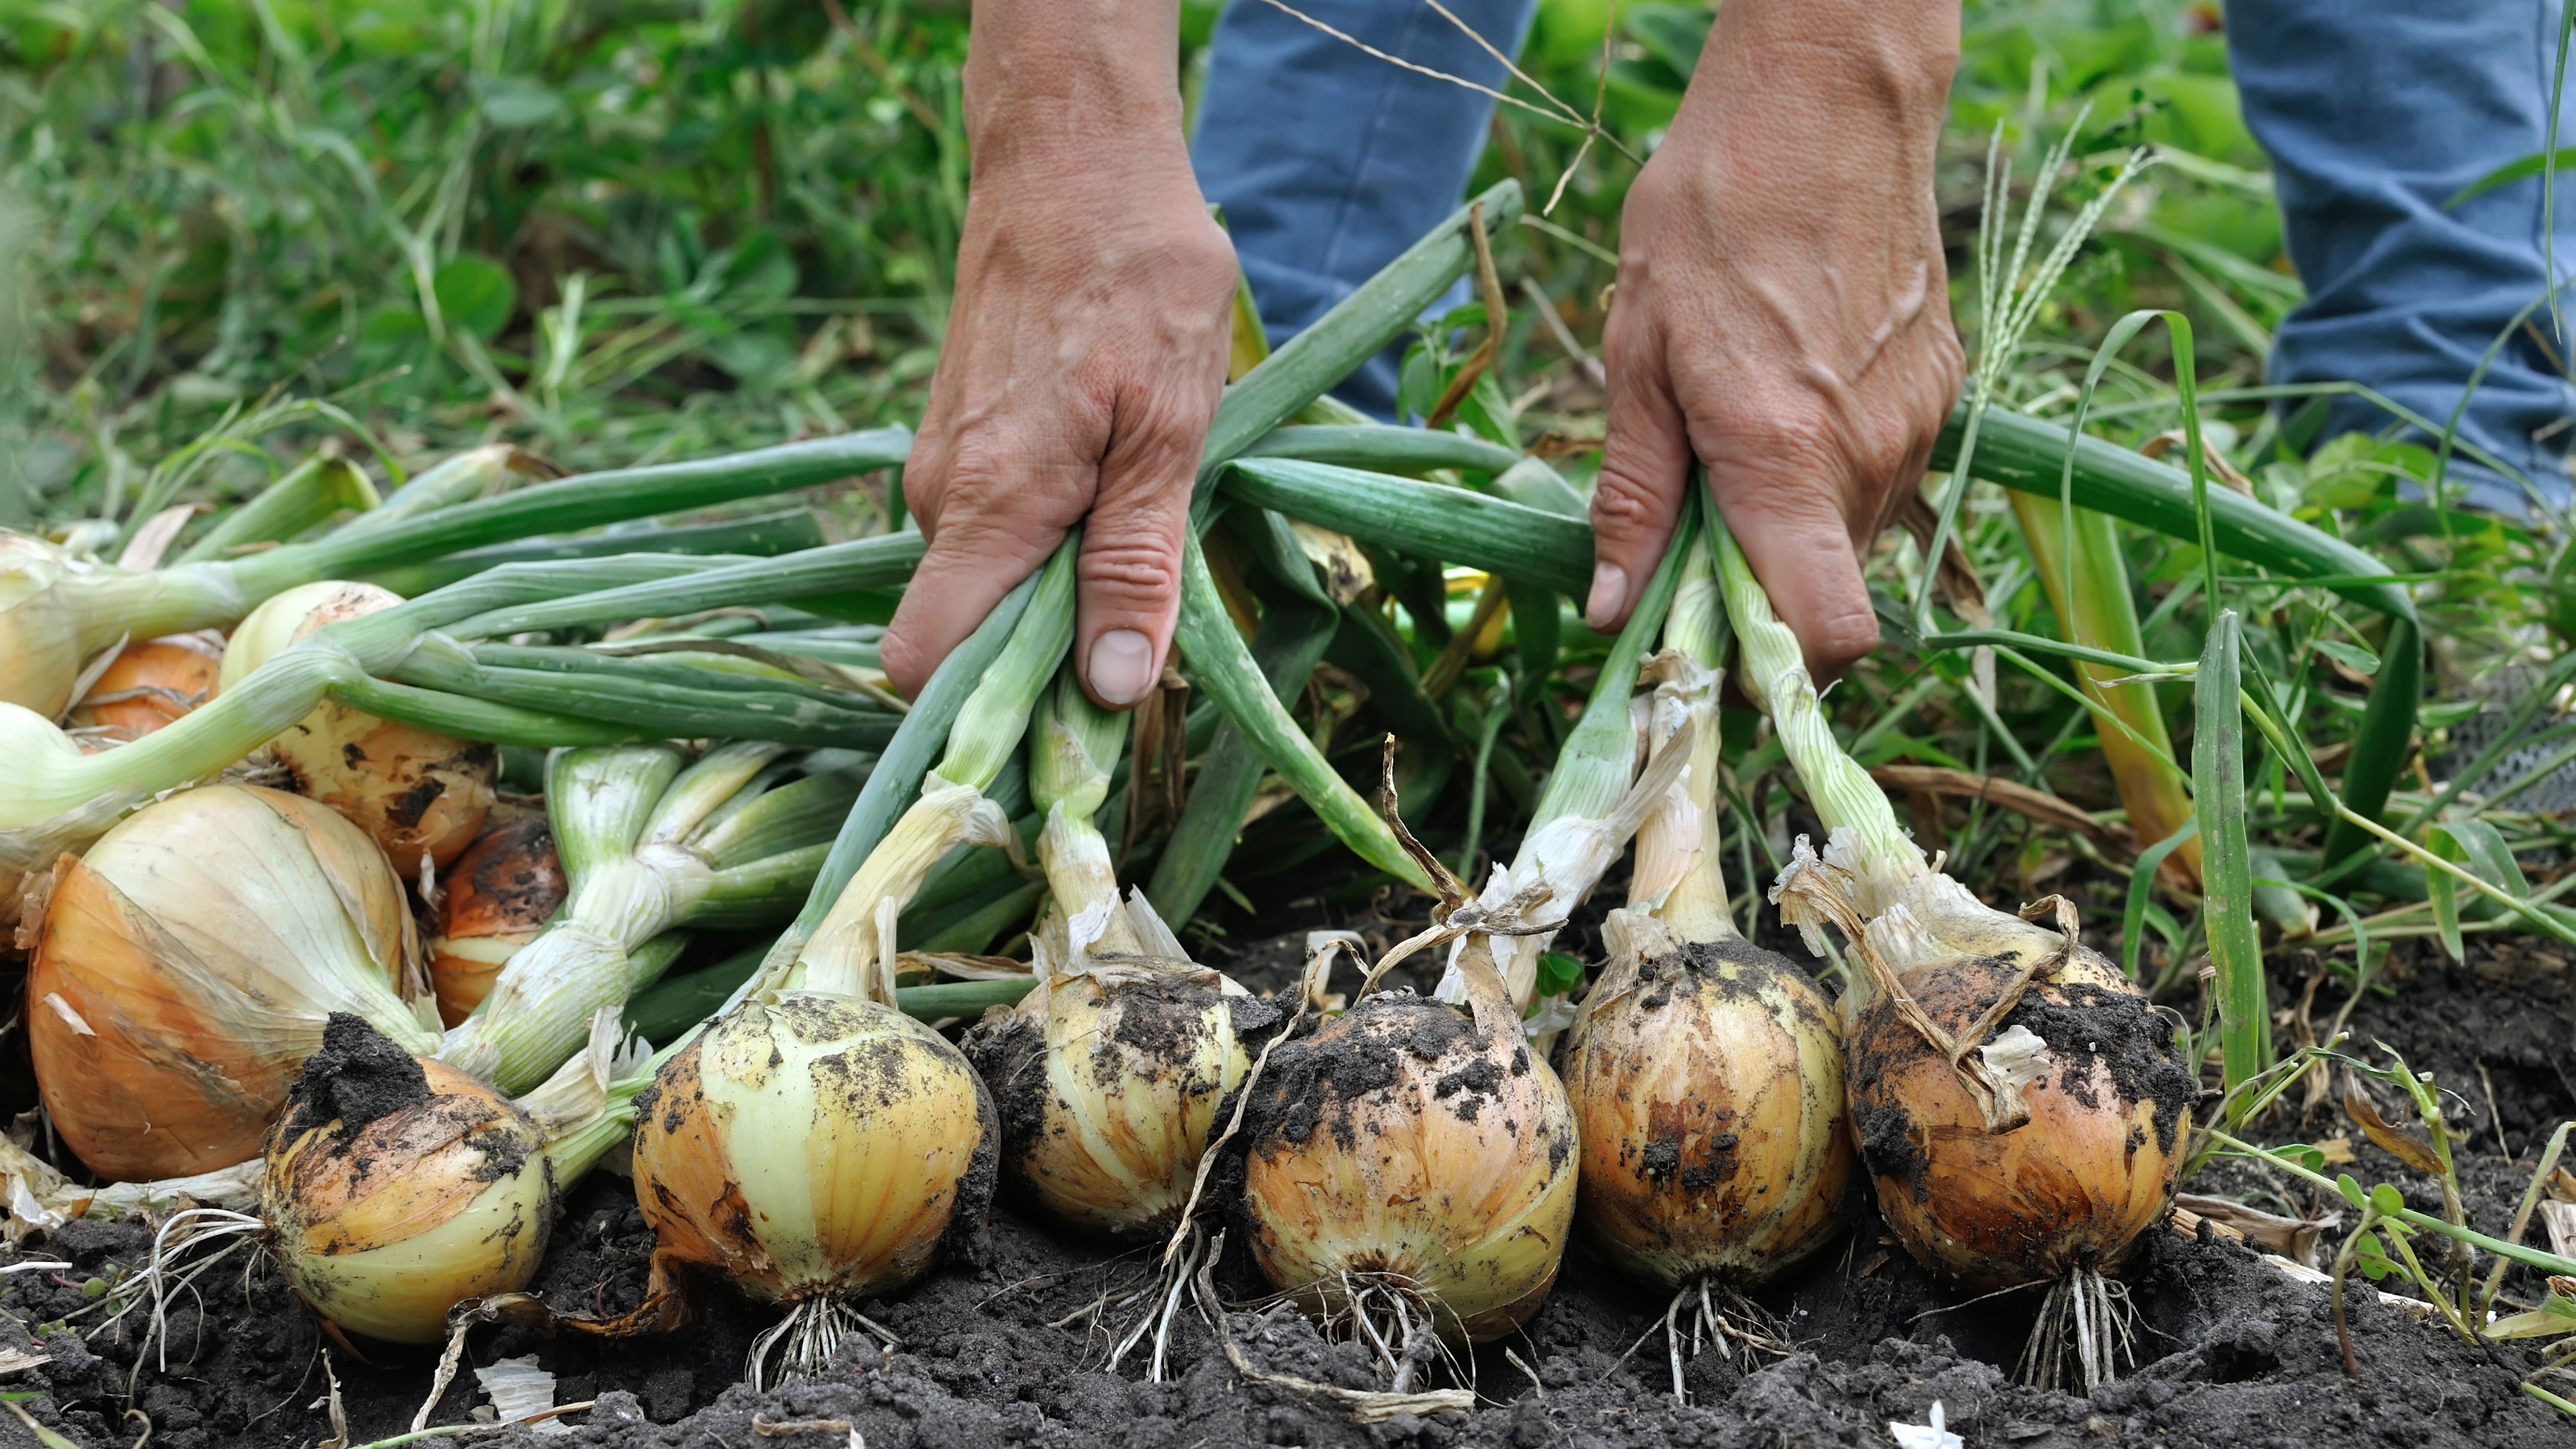 Image of Carrots and onions harvested from garden